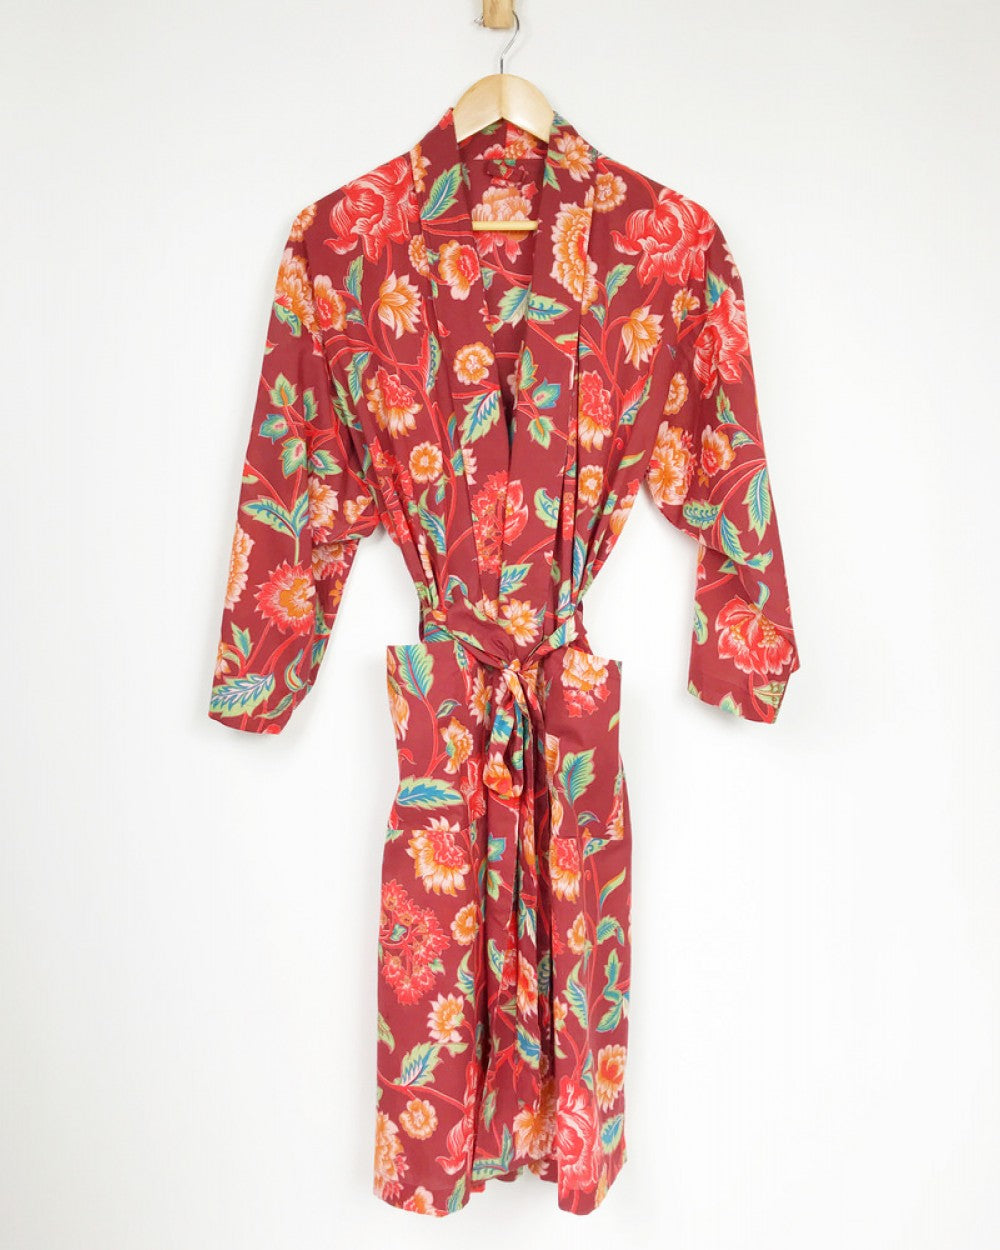 Lily Kimono in red lily pattern